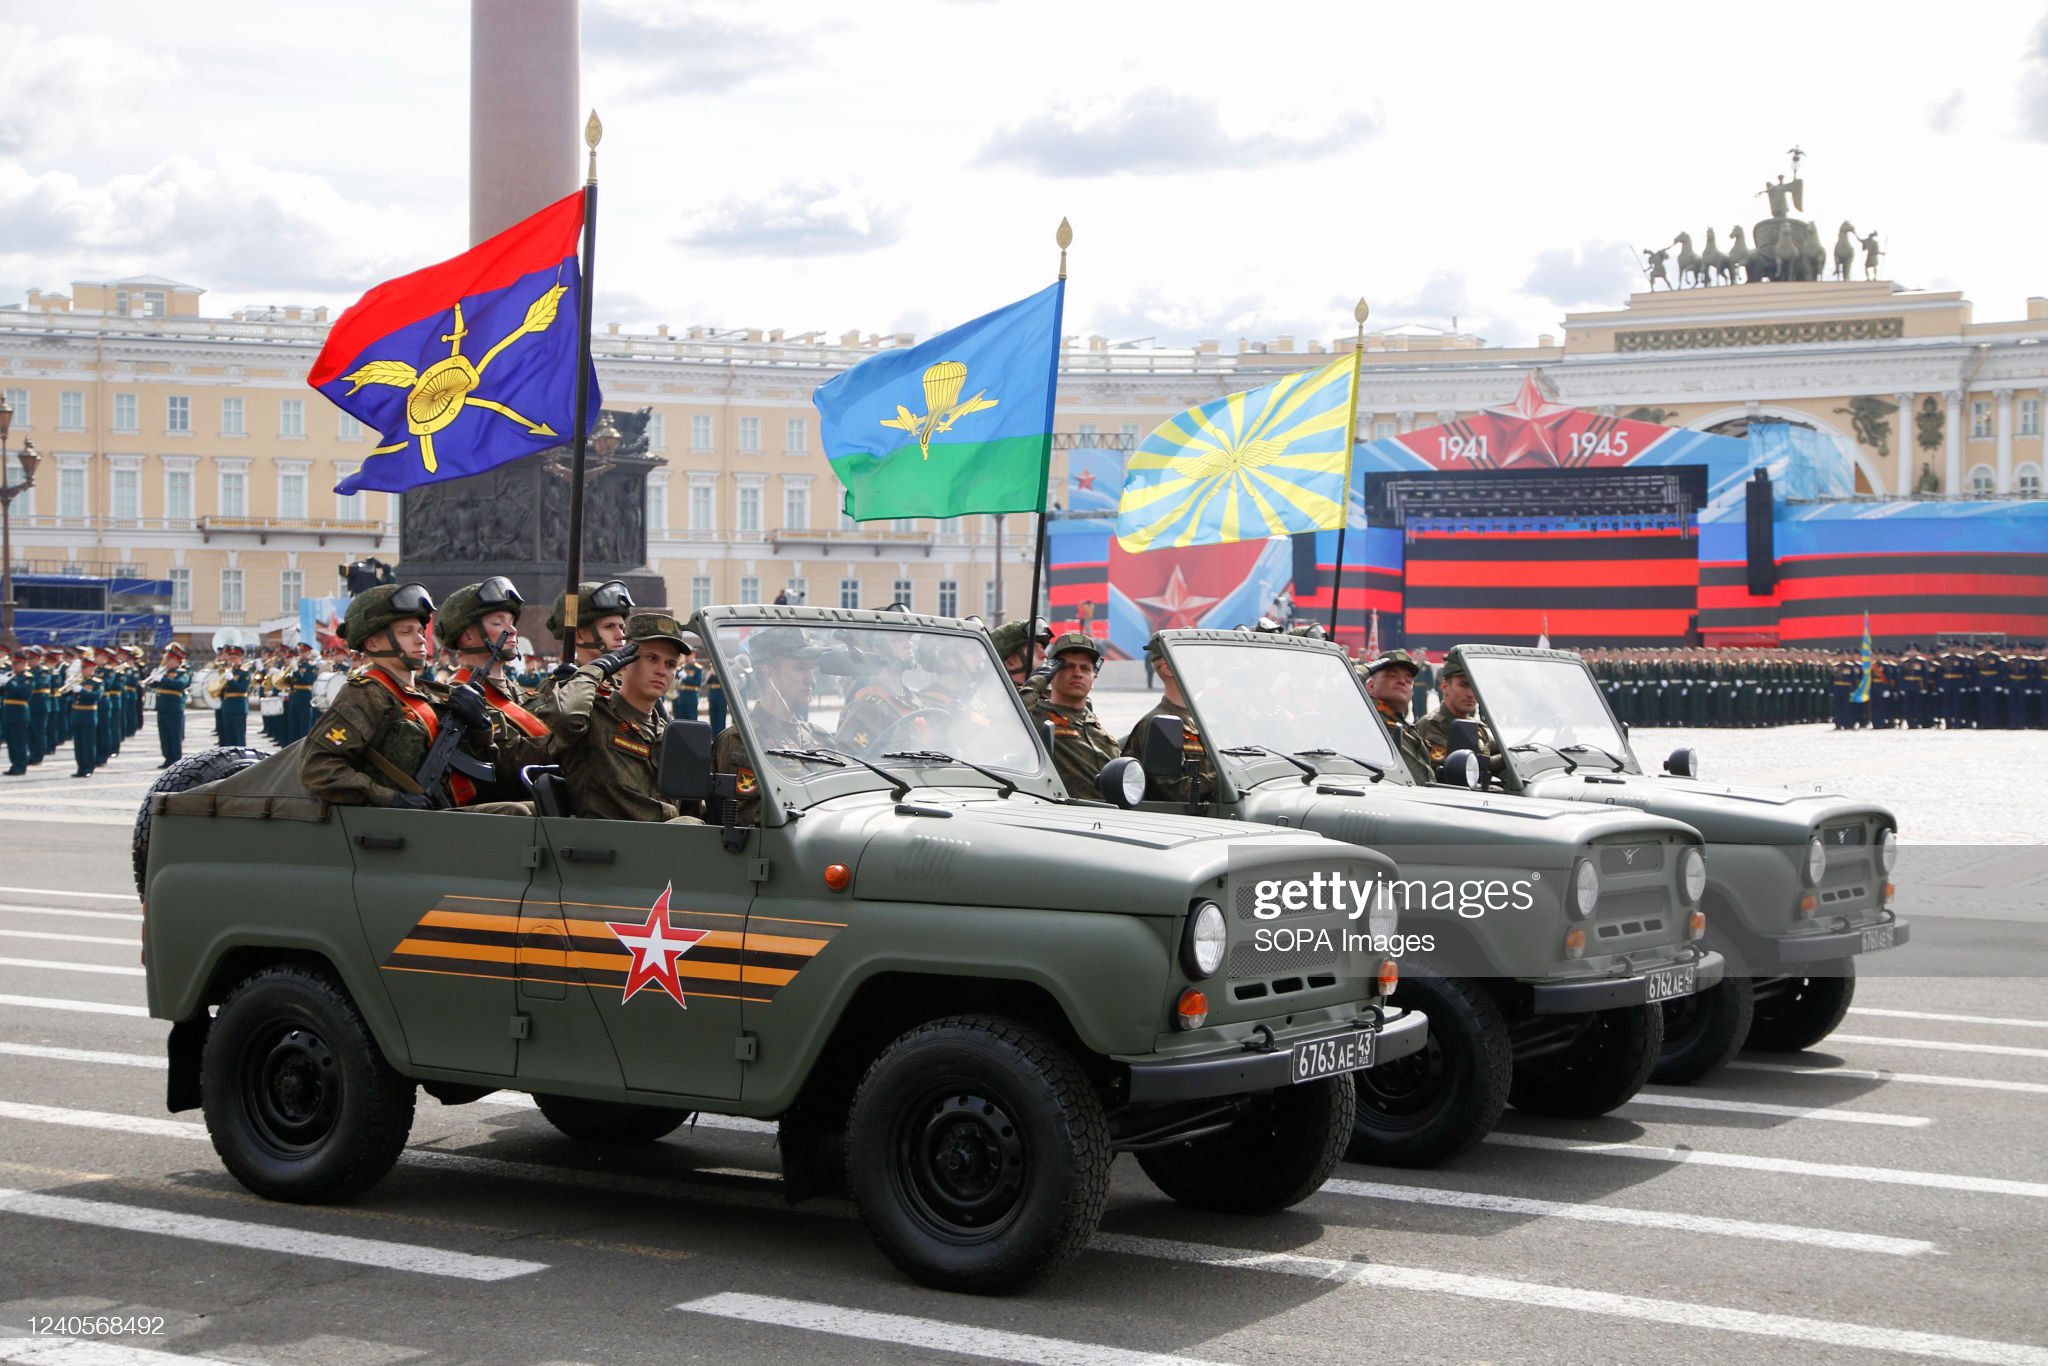 UAZ cars take part in a parade.